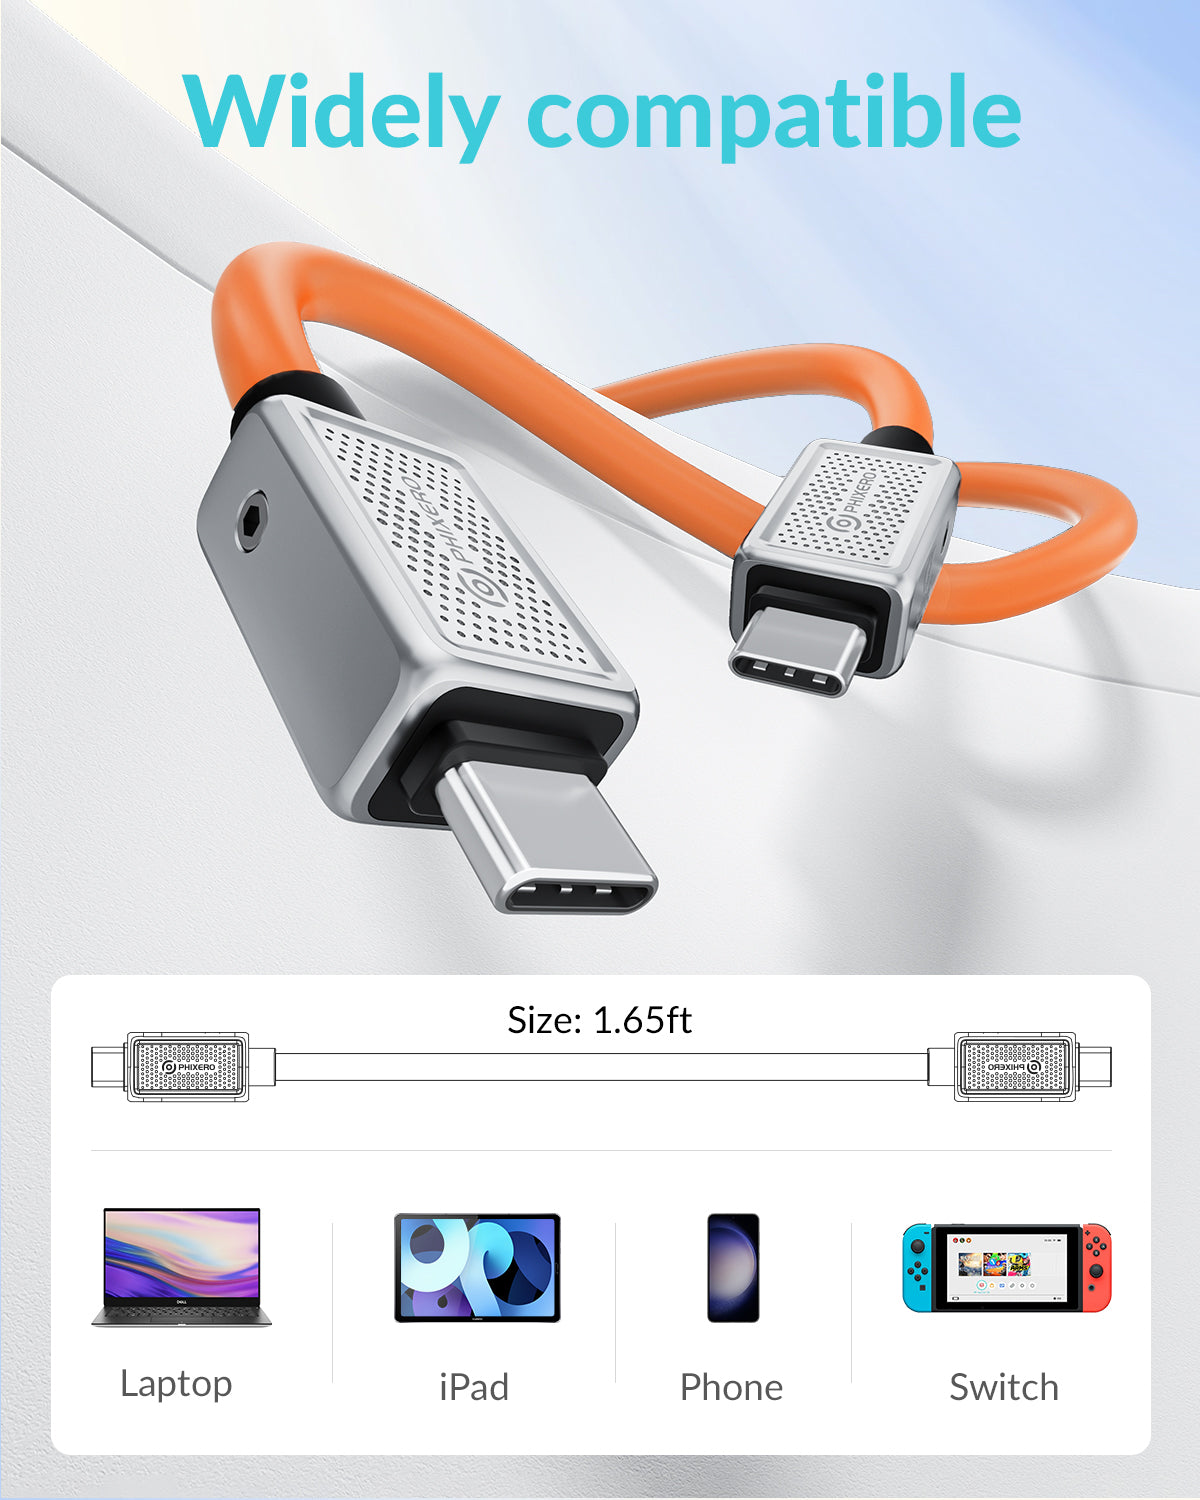 PHIXERO USB 3.2 Gen 2 * 2 Cable 1.65 ft, 20Gbps Data Transfer Cable and 4K/60HZ USB C Video Cable, 240W Fast Charging Cable Compatible with Thunderbolt 3, MacBook Pro, iPad Pro, Samsung(Orange)